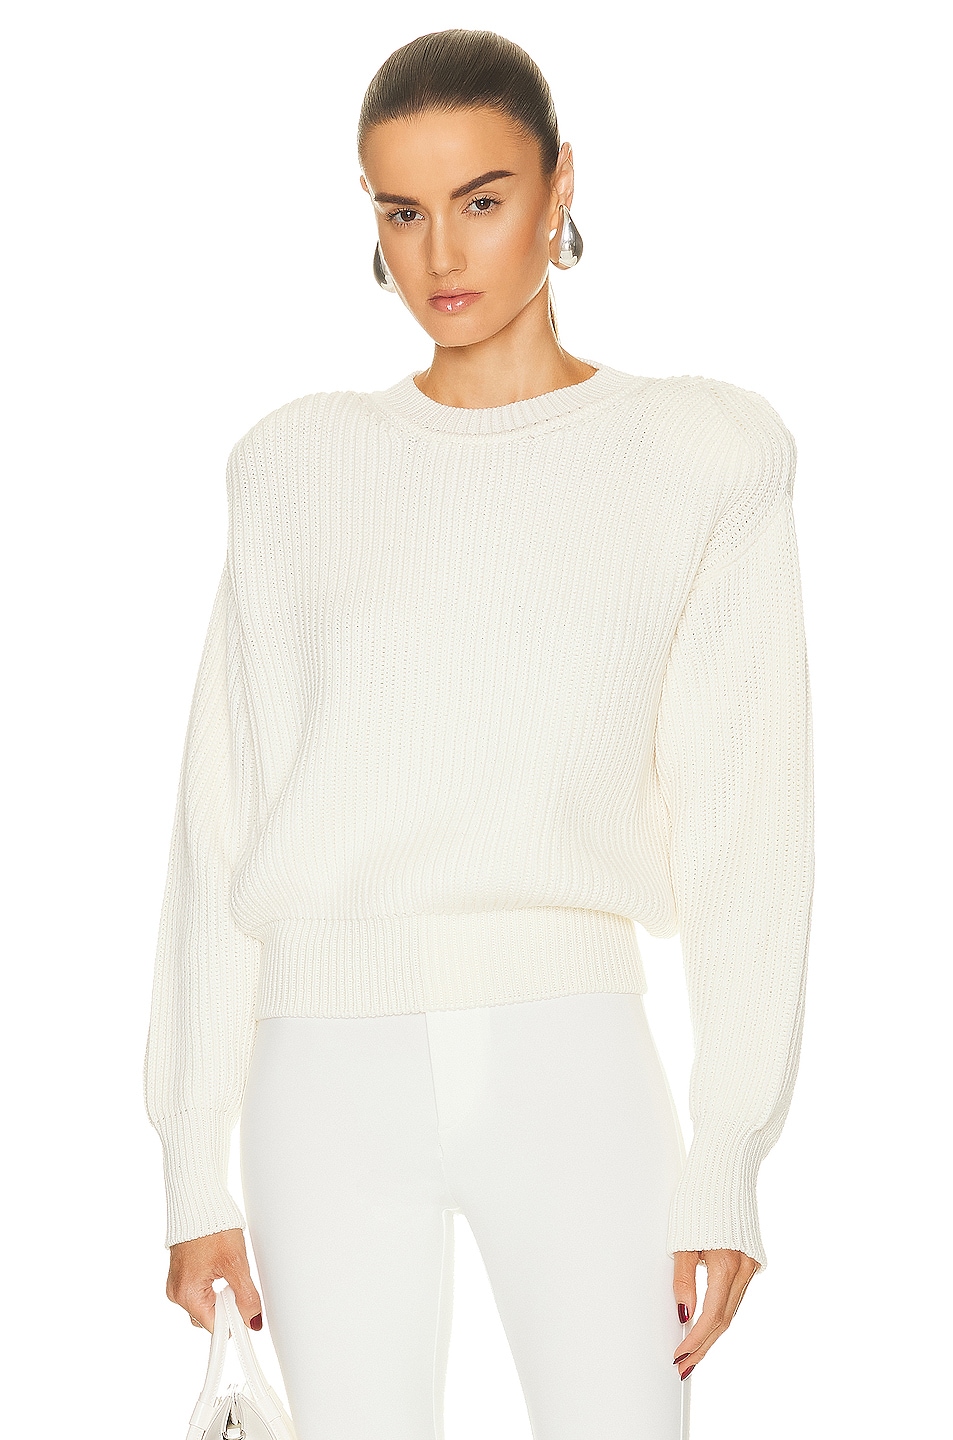 Image 1 of WARDROBE.NYC x Hailey Bieber Hb Knit Sweater in Off White